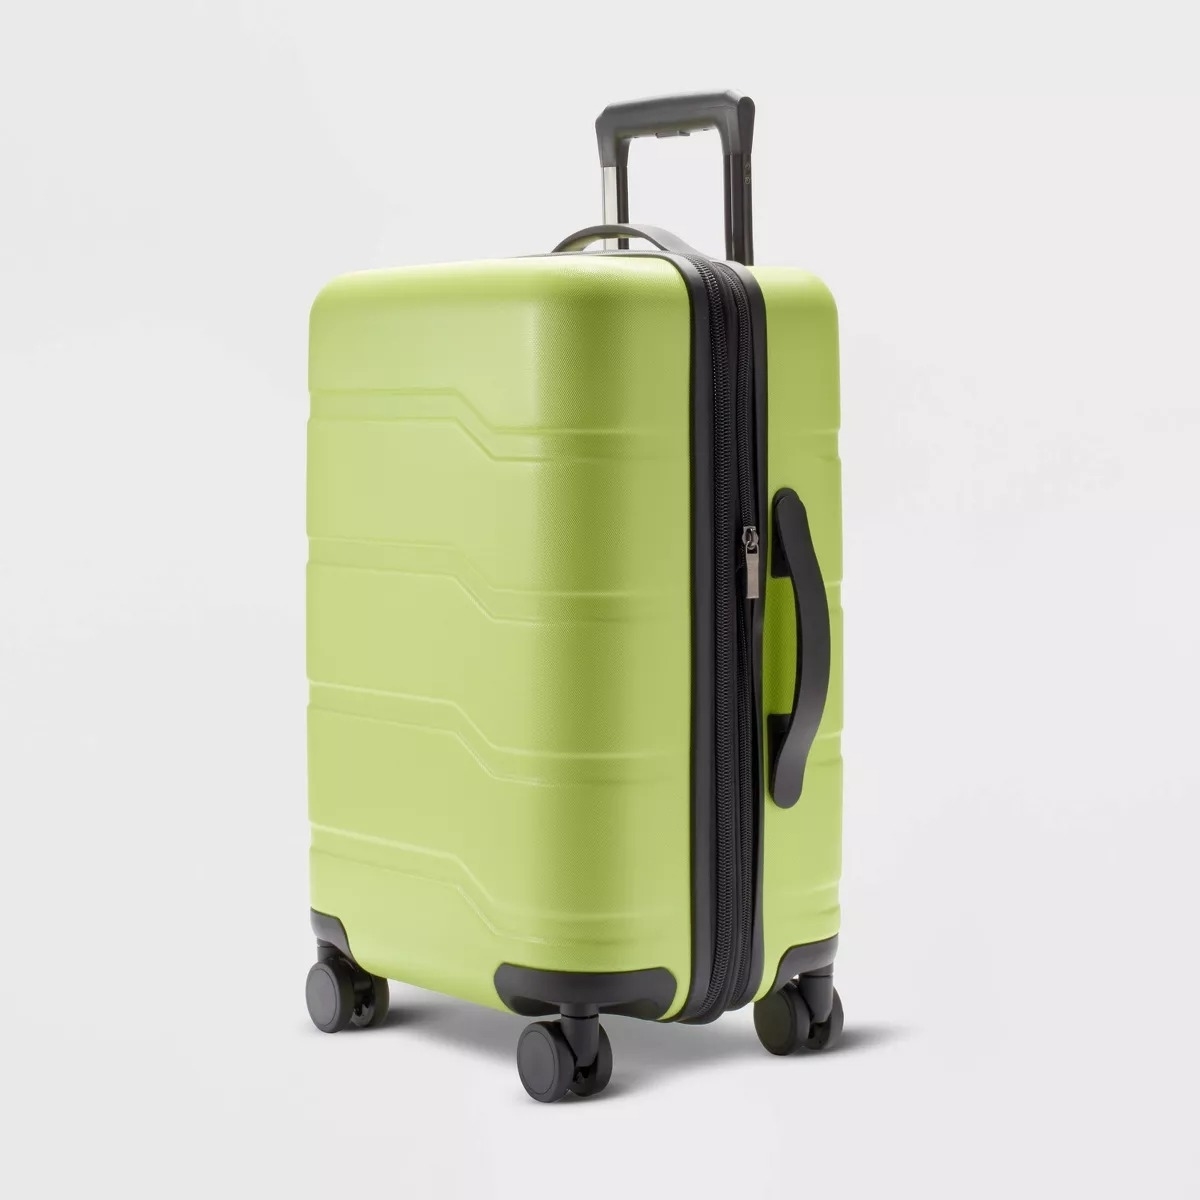 My Affordable Target Suitcase Looks Like A Pricier Internet-Famous Brand